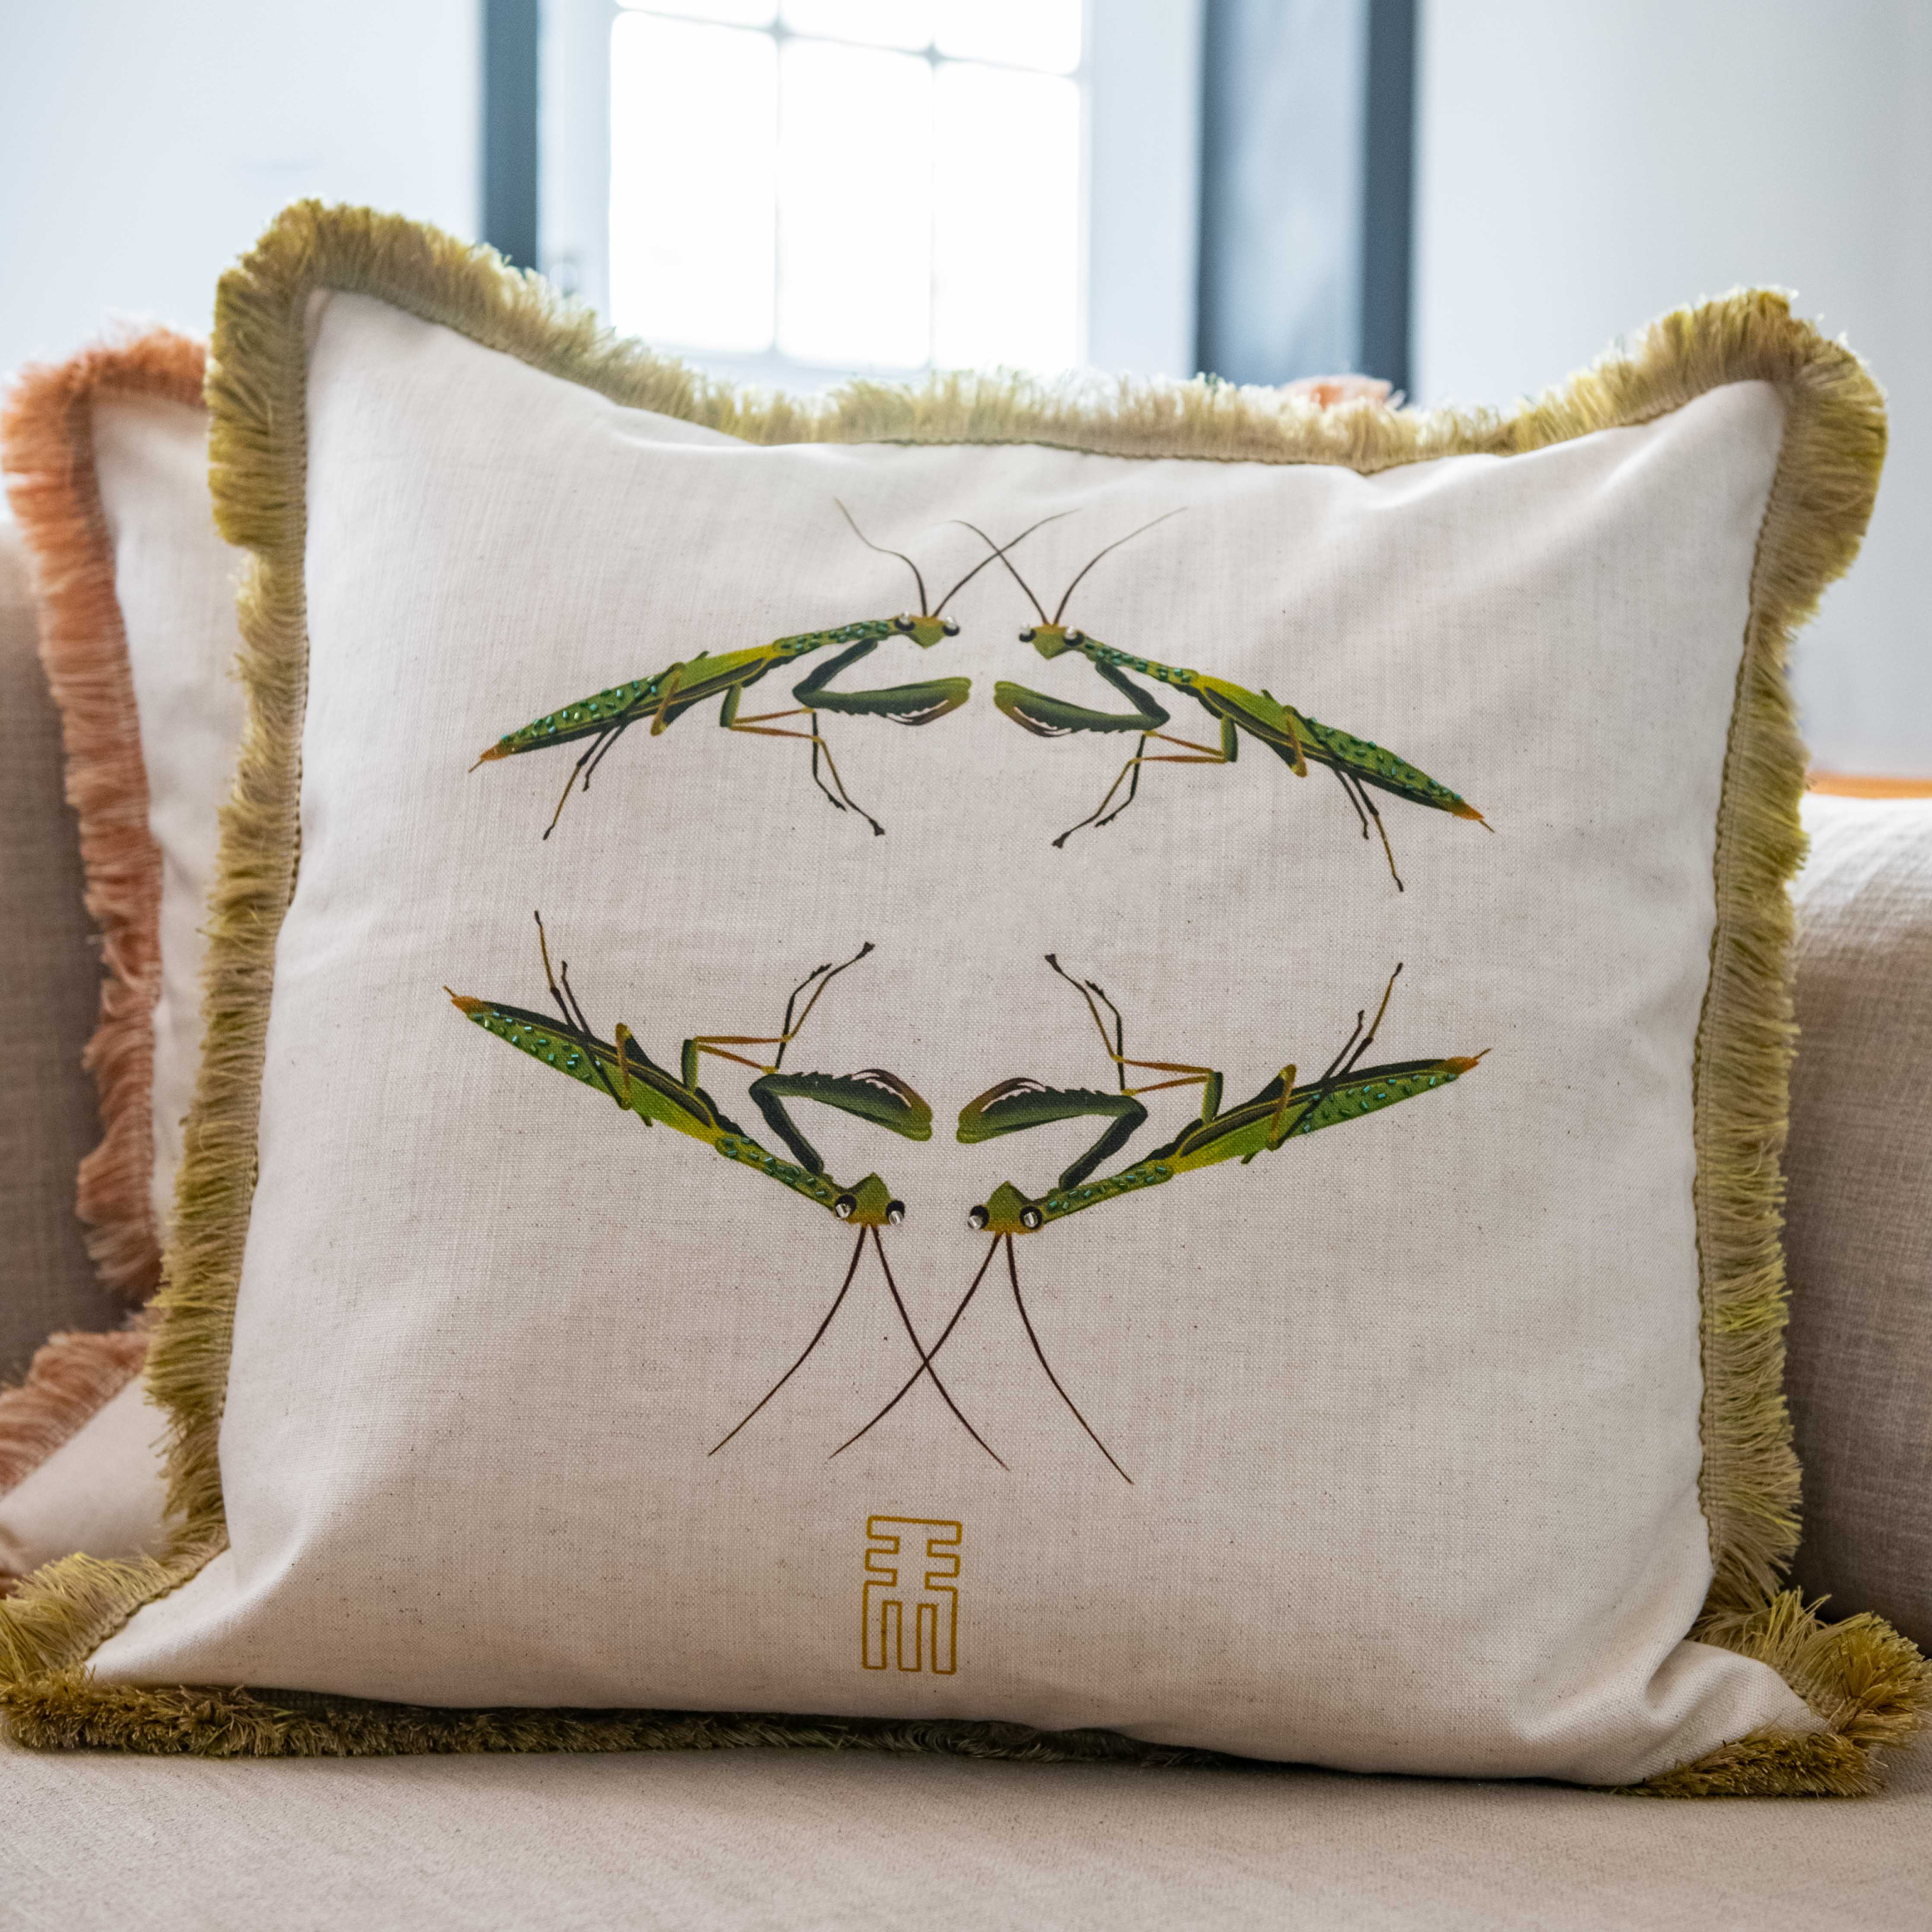 An African Farm Praying Mantis Scatter Cushion Cover